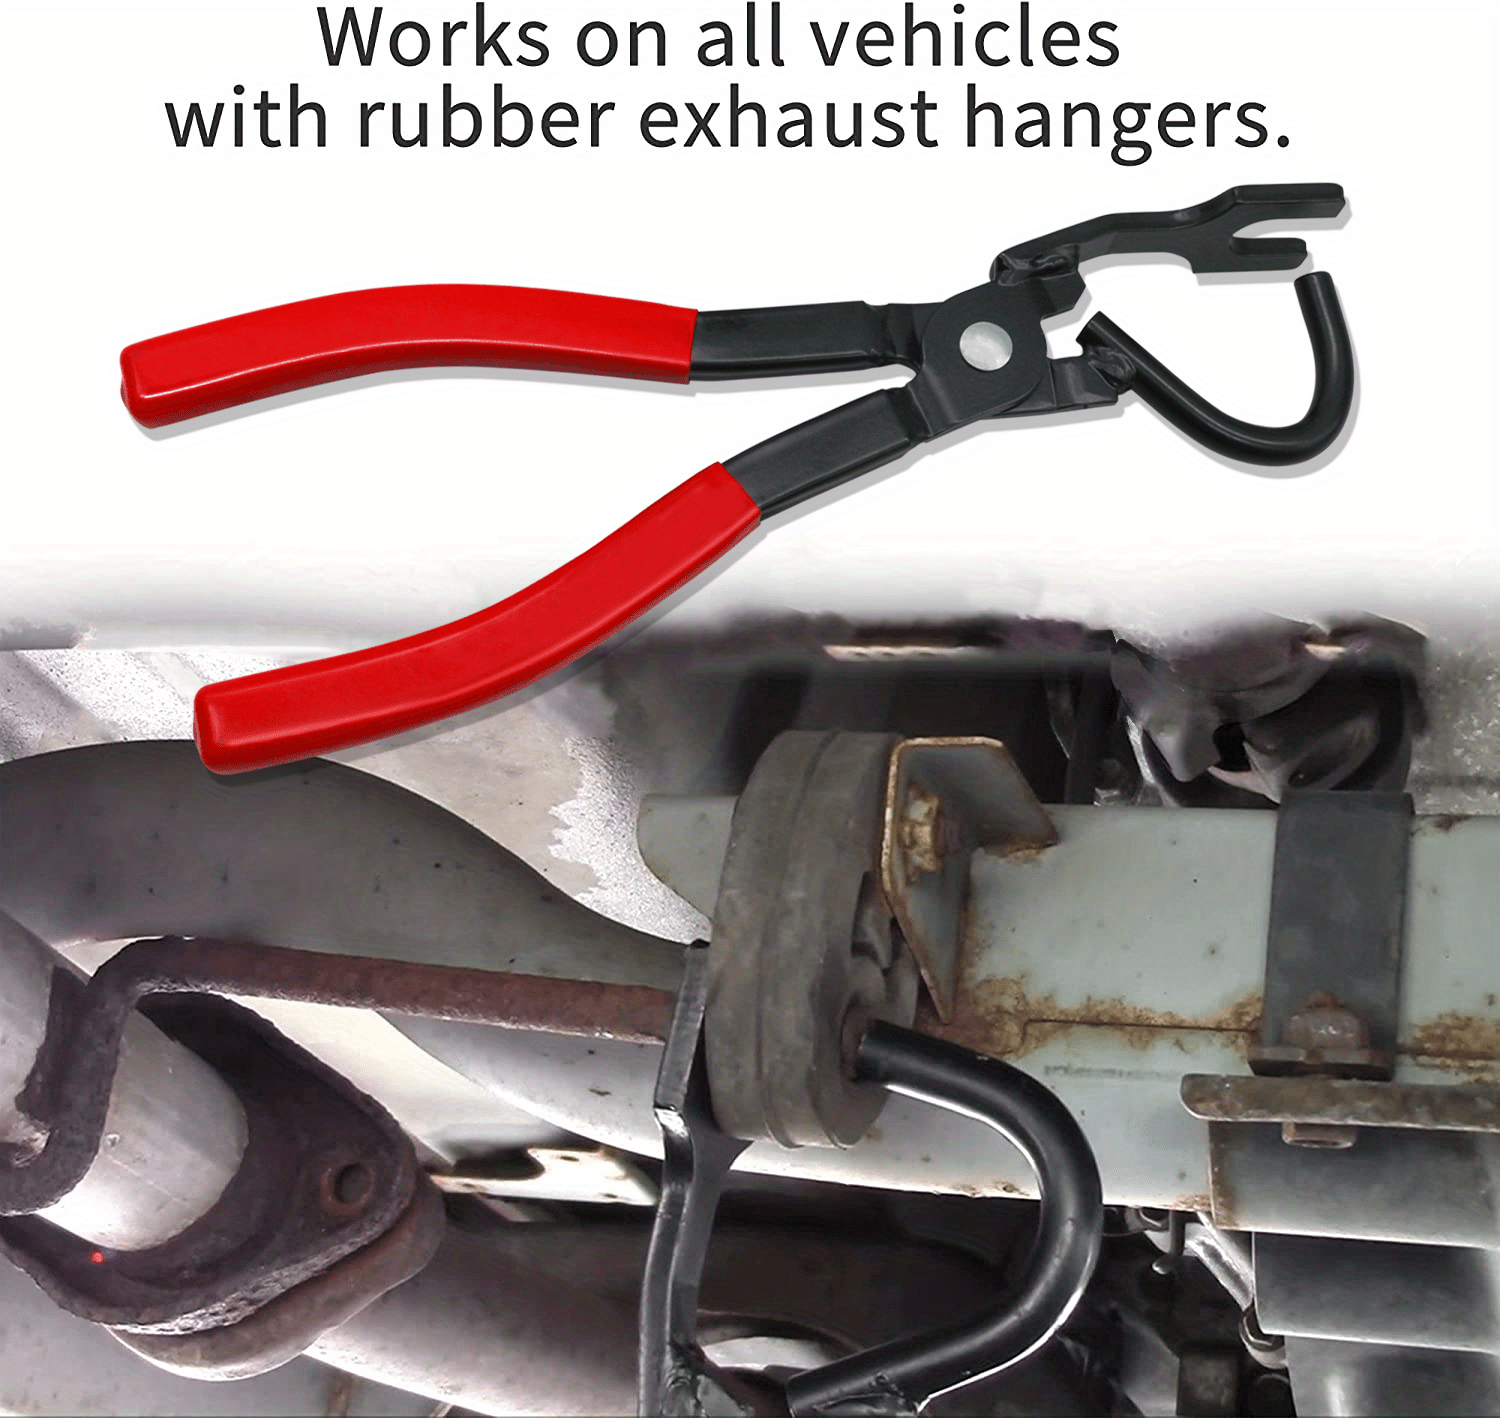 How to: Disconnect exhaust hangers with pliers & lower exhaust 